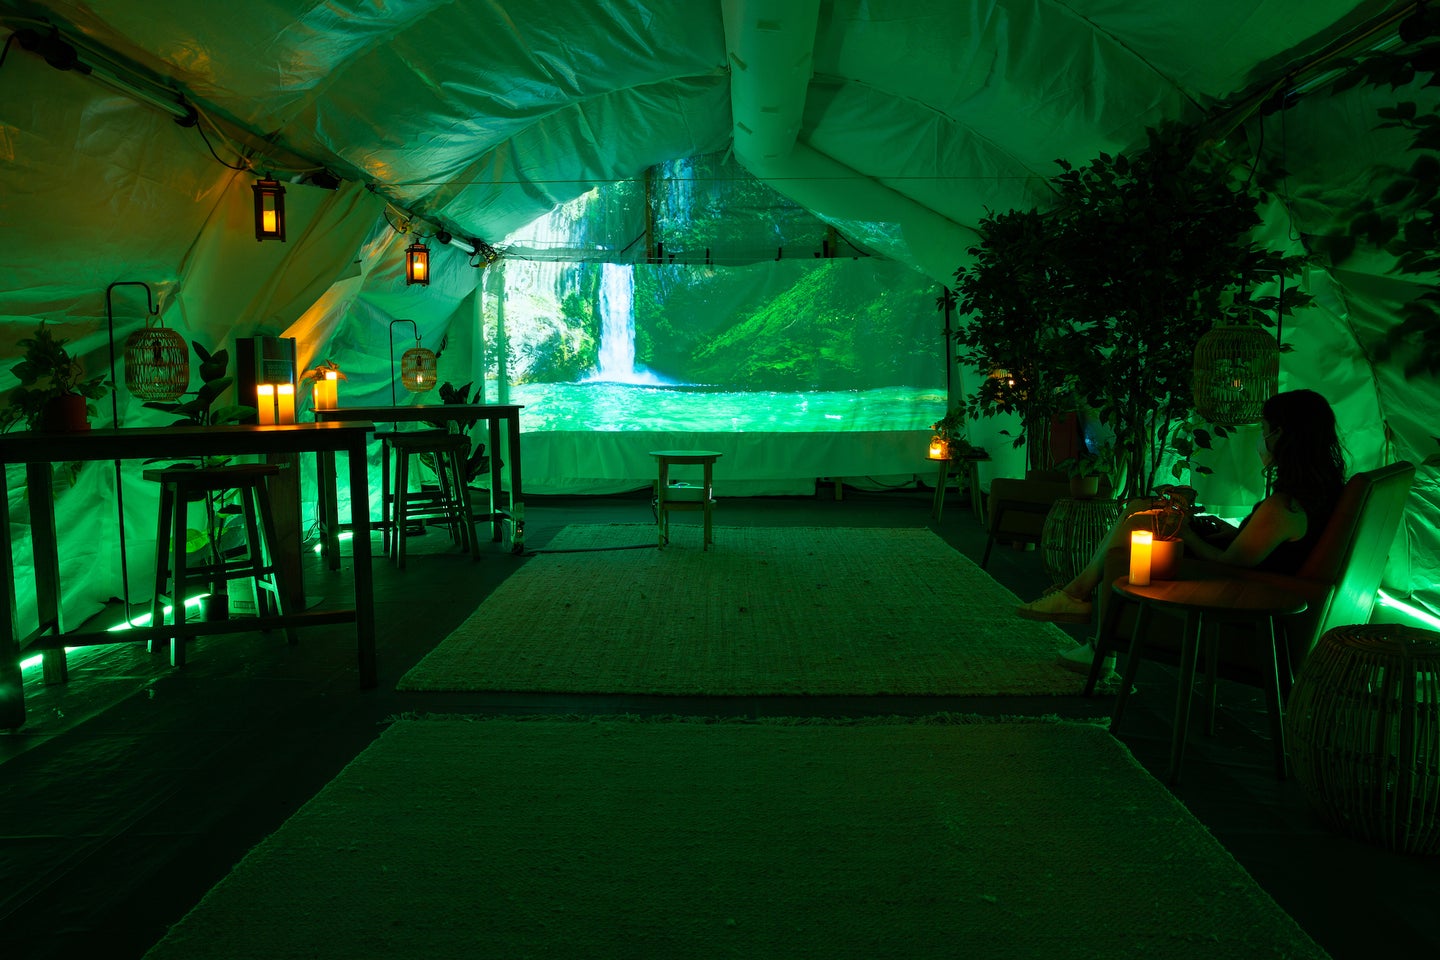 COVID tent filled with green light and a forest scene projected on one wall